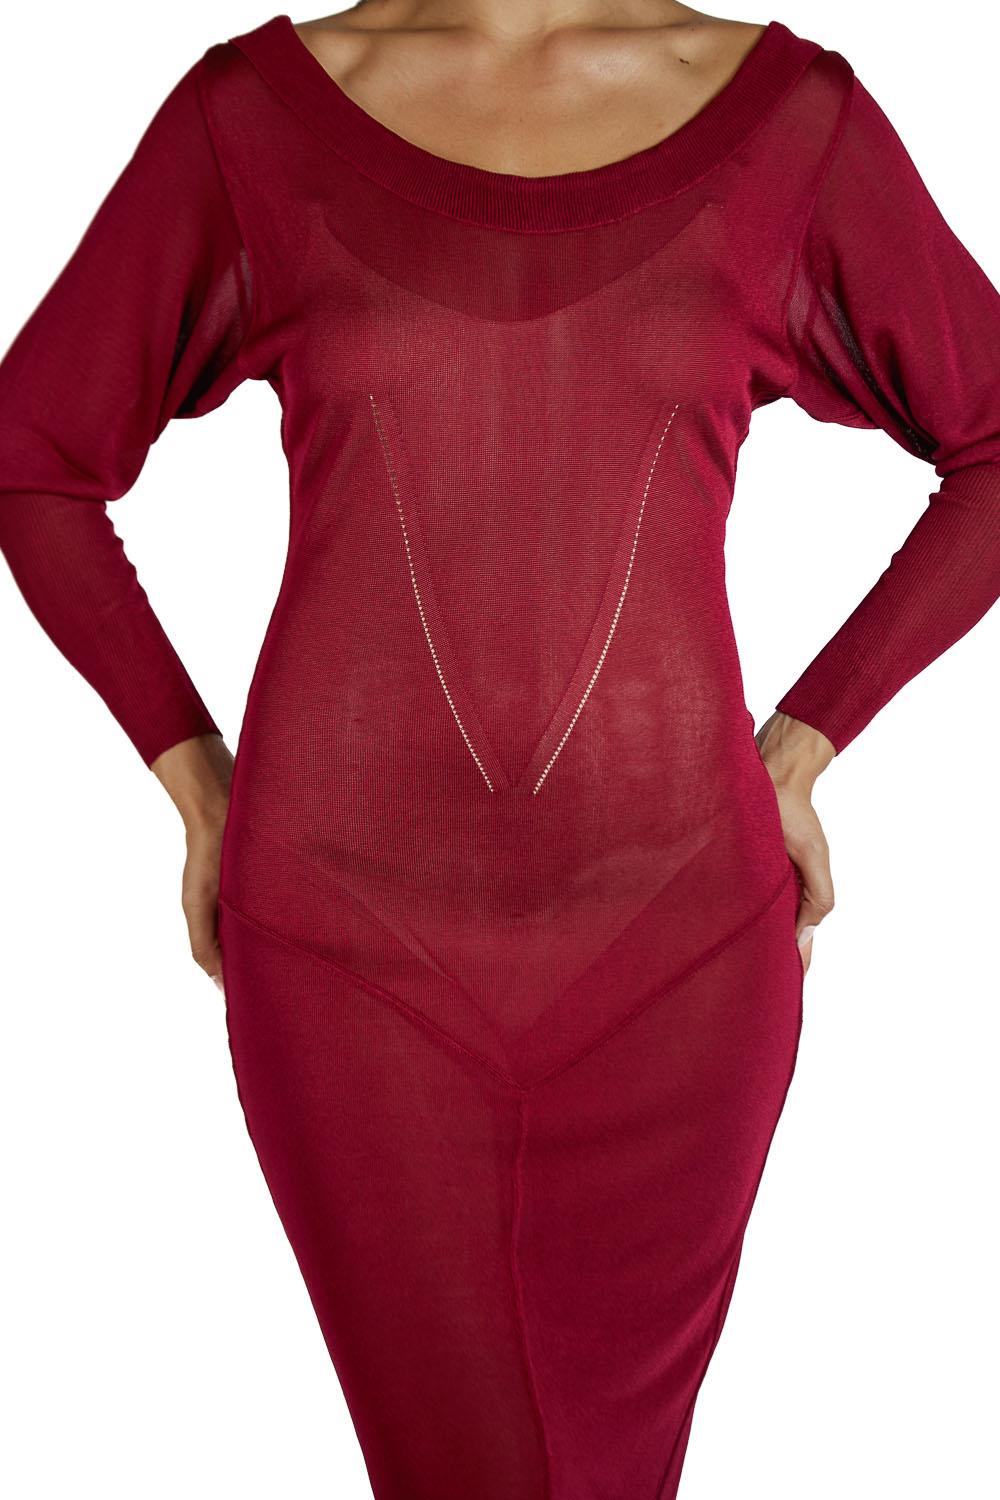 1980S AZZEDINE ALAIA Claret Red Sheer Rayon Blend Knit Long Sleeved Dress For Sale 5